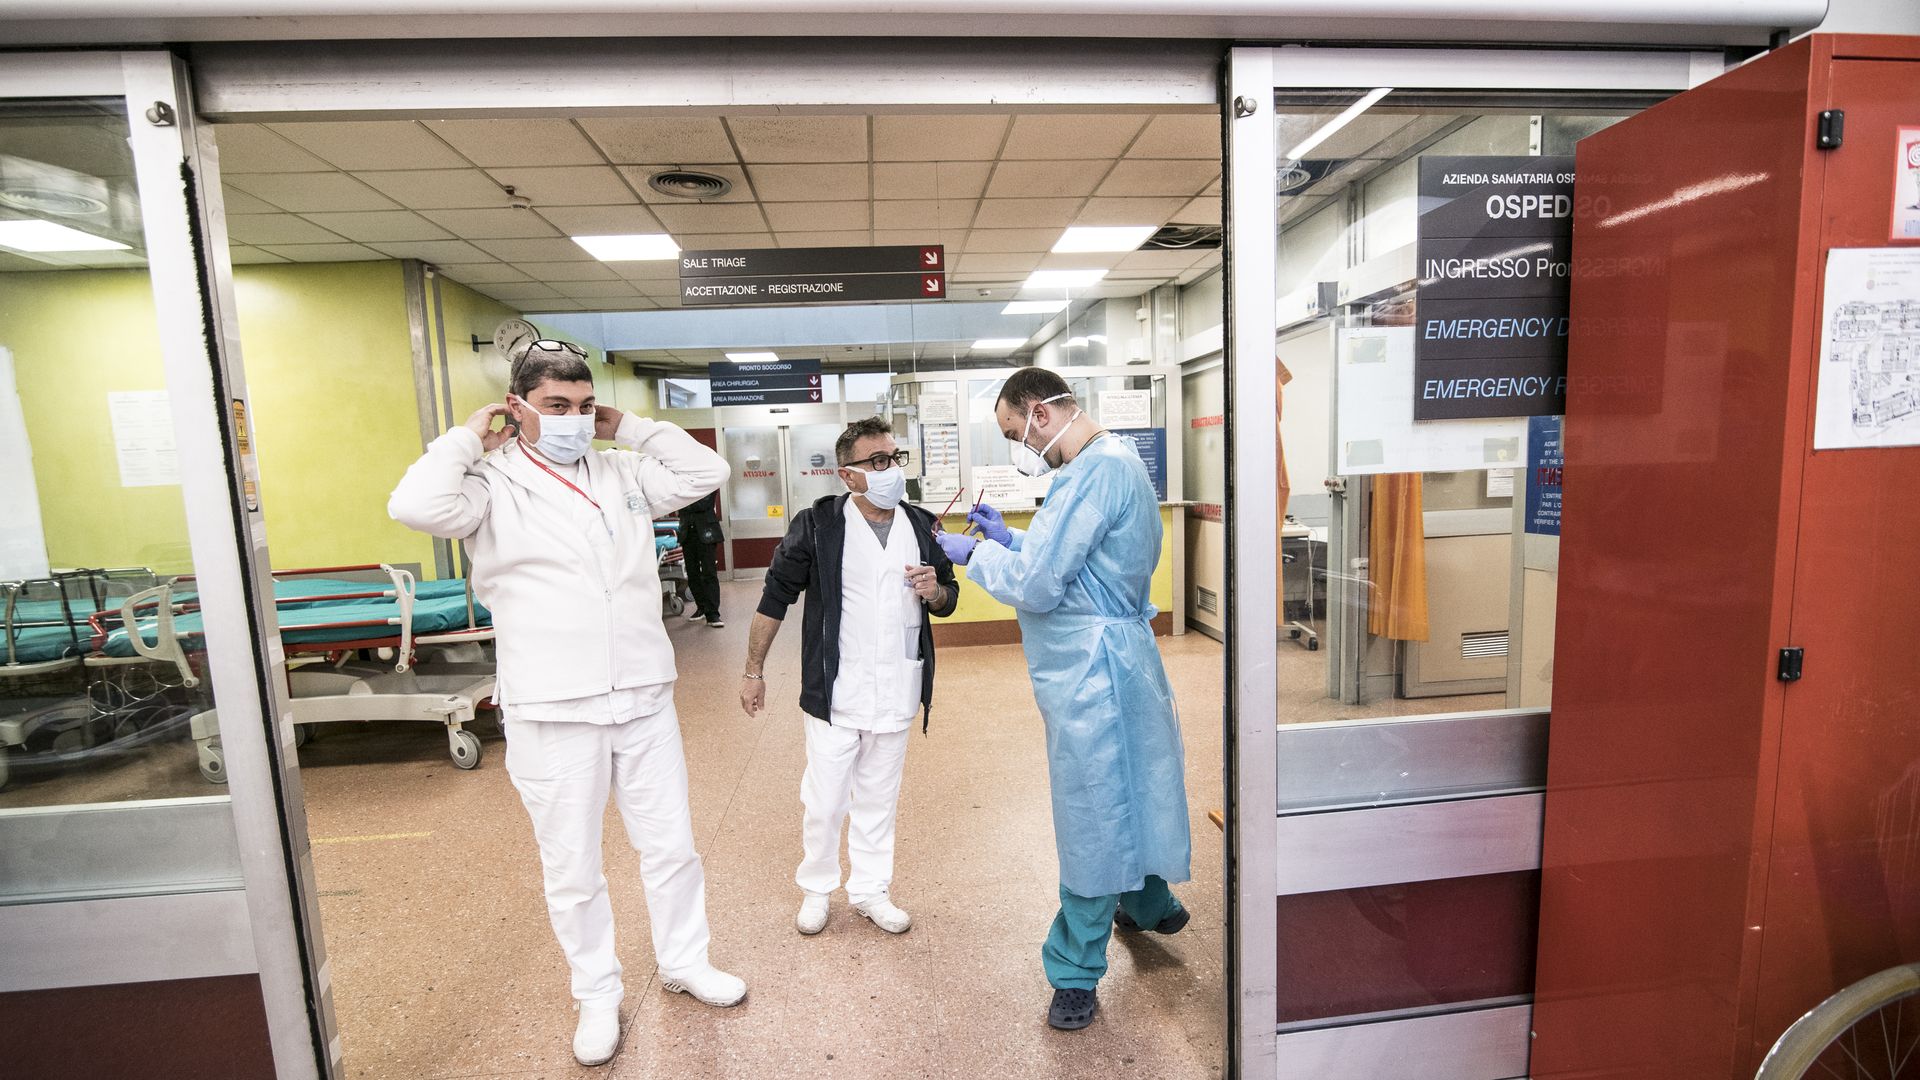 Three fully masked medical workers stand inside the doors of a hospital ER.